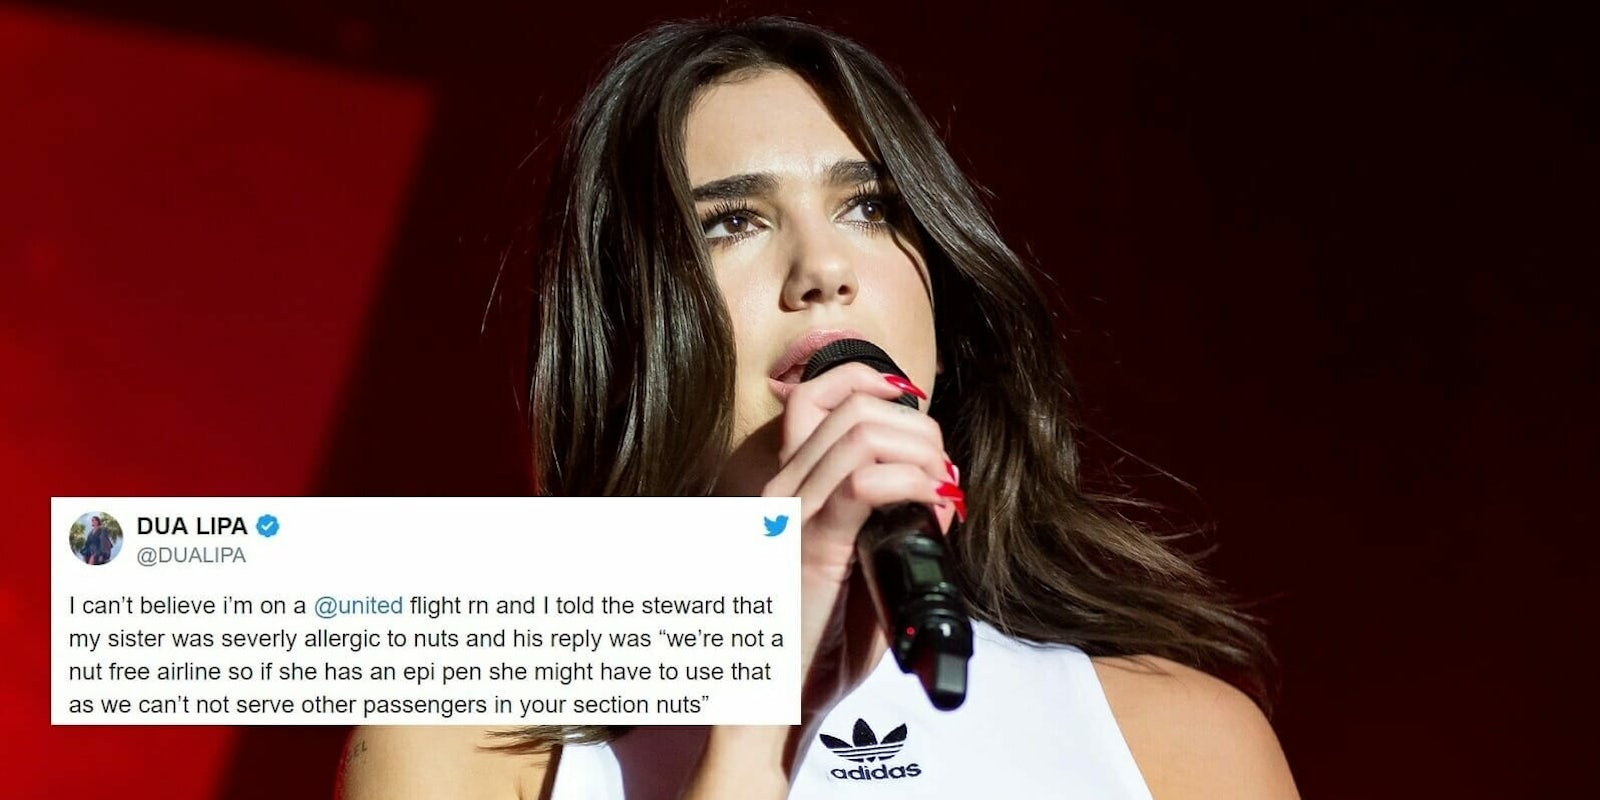 Pop singer Dua Lipa came after United Airlines on Twitter after she received an inappropriate response from the company regarding her sister’s nut allergy.